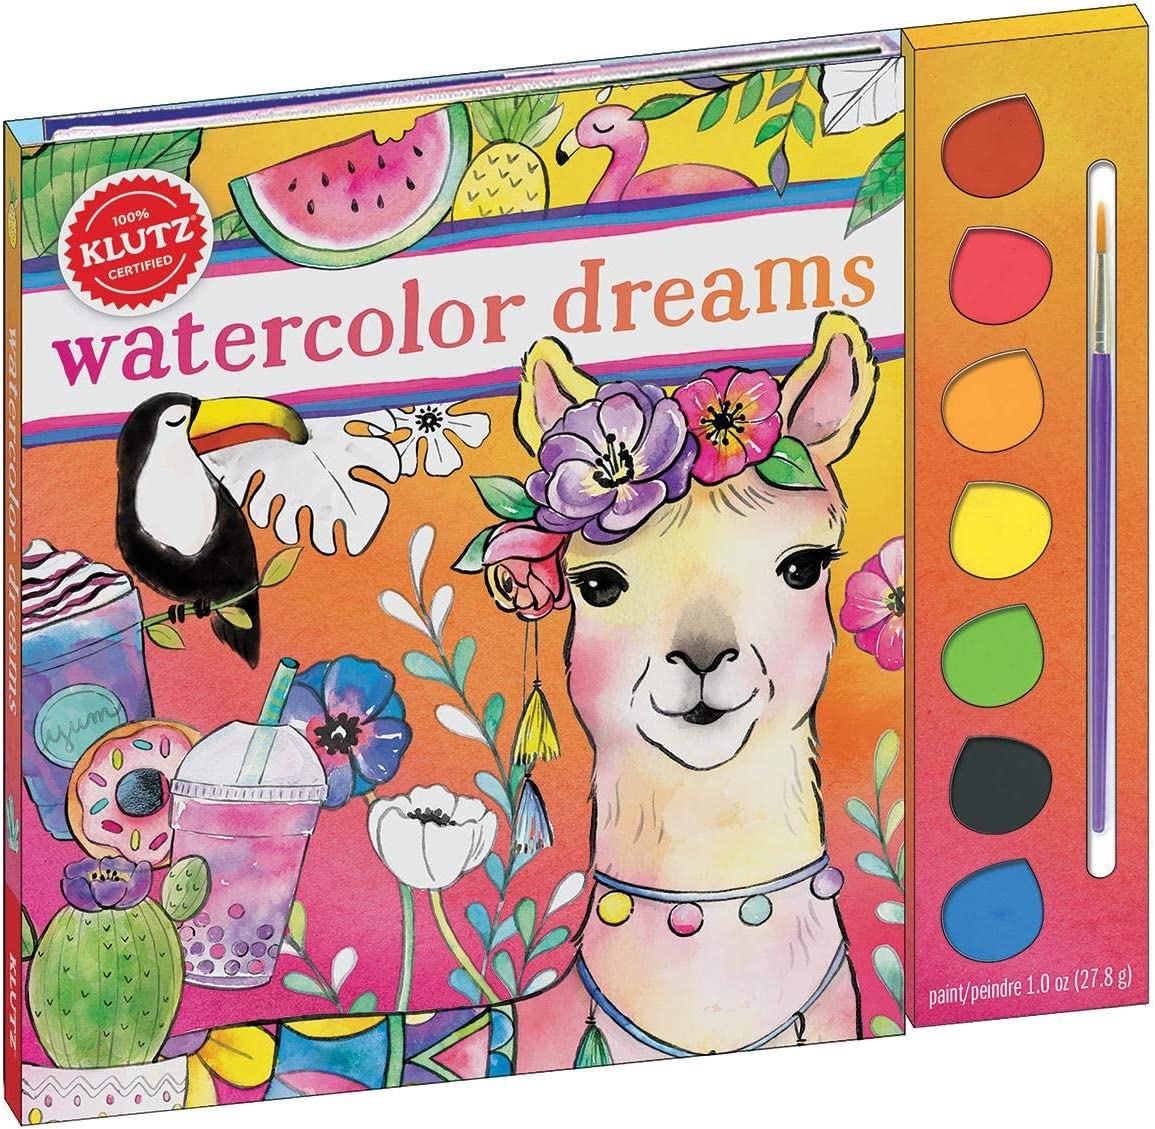 Watercolor Dreams (Klutz Craft Kit) Import To Shop ×Product customization General Description Gallery Reviews Variations